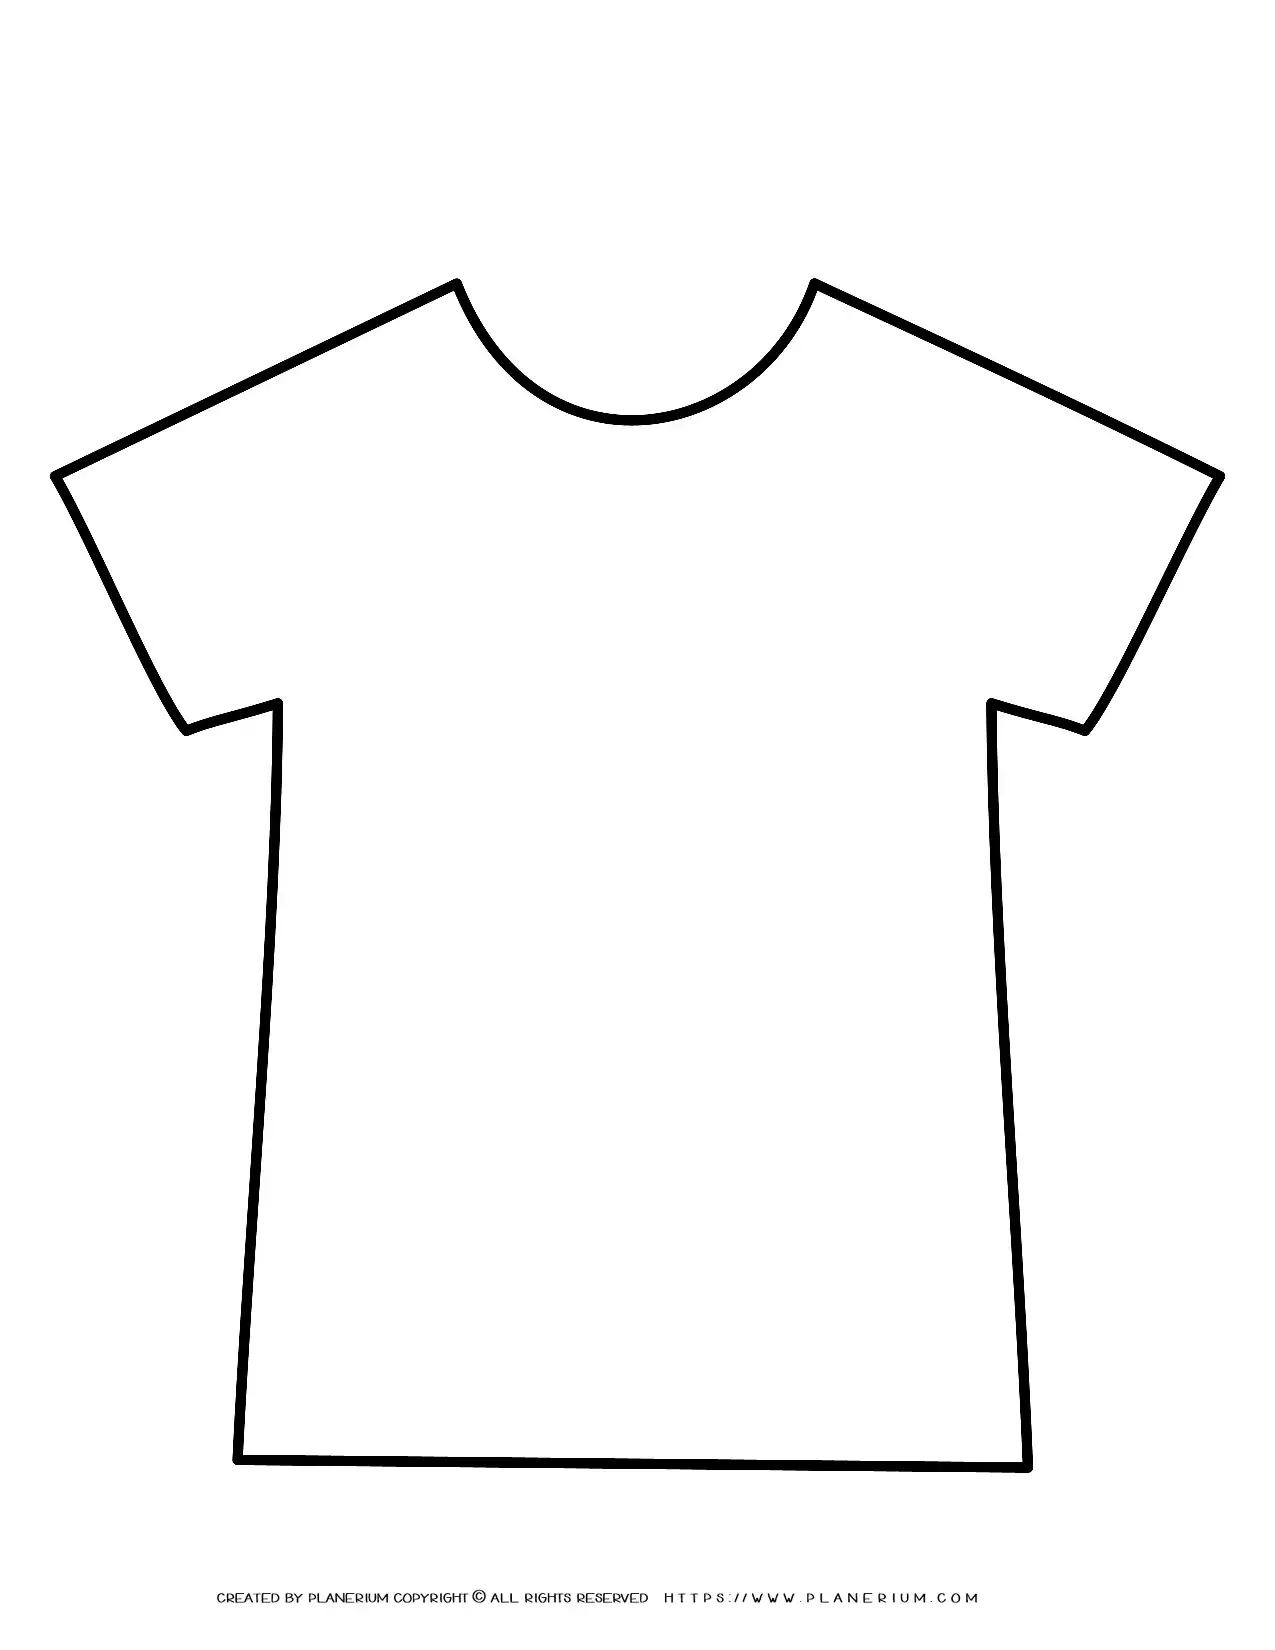 Encourage Creativity and Learning with a Printable T shirt Outline Template